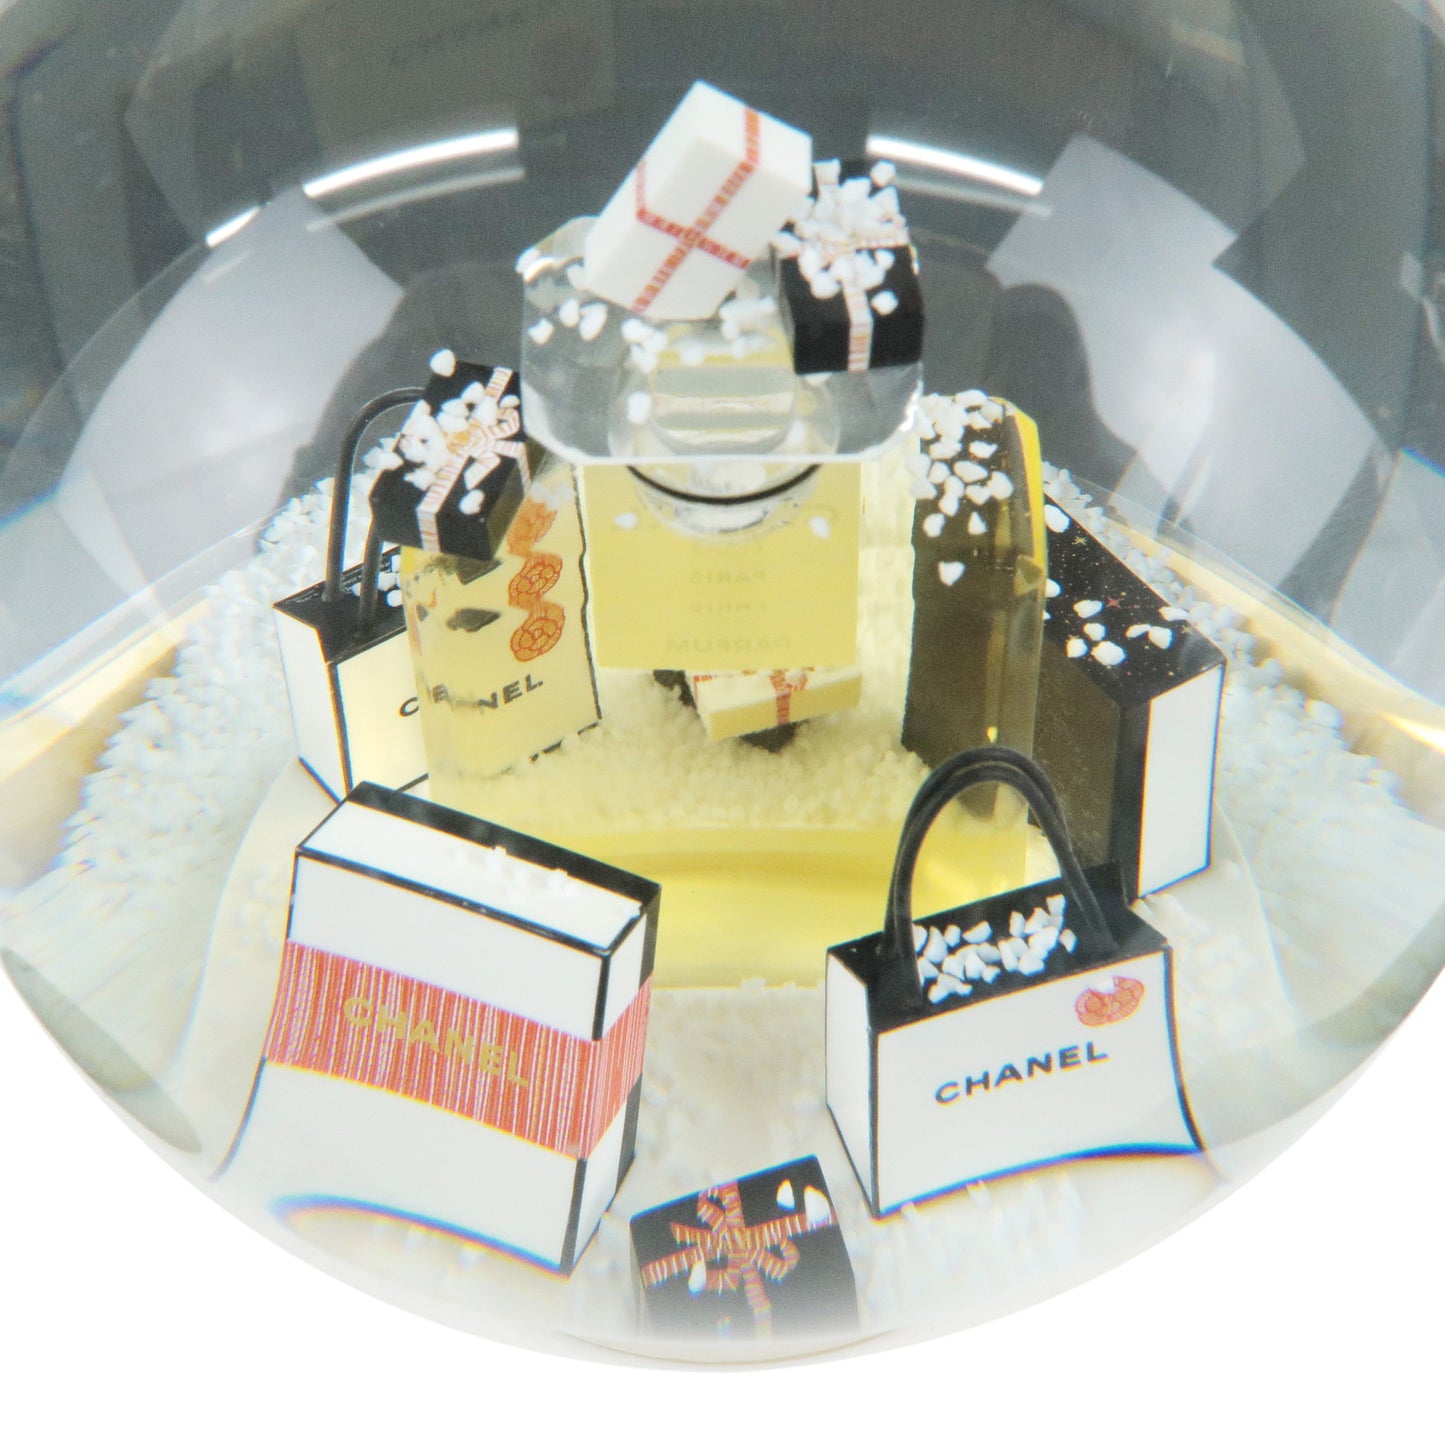 CHANEL Snow Globe 2021 Novelty Brand Accessory Collection